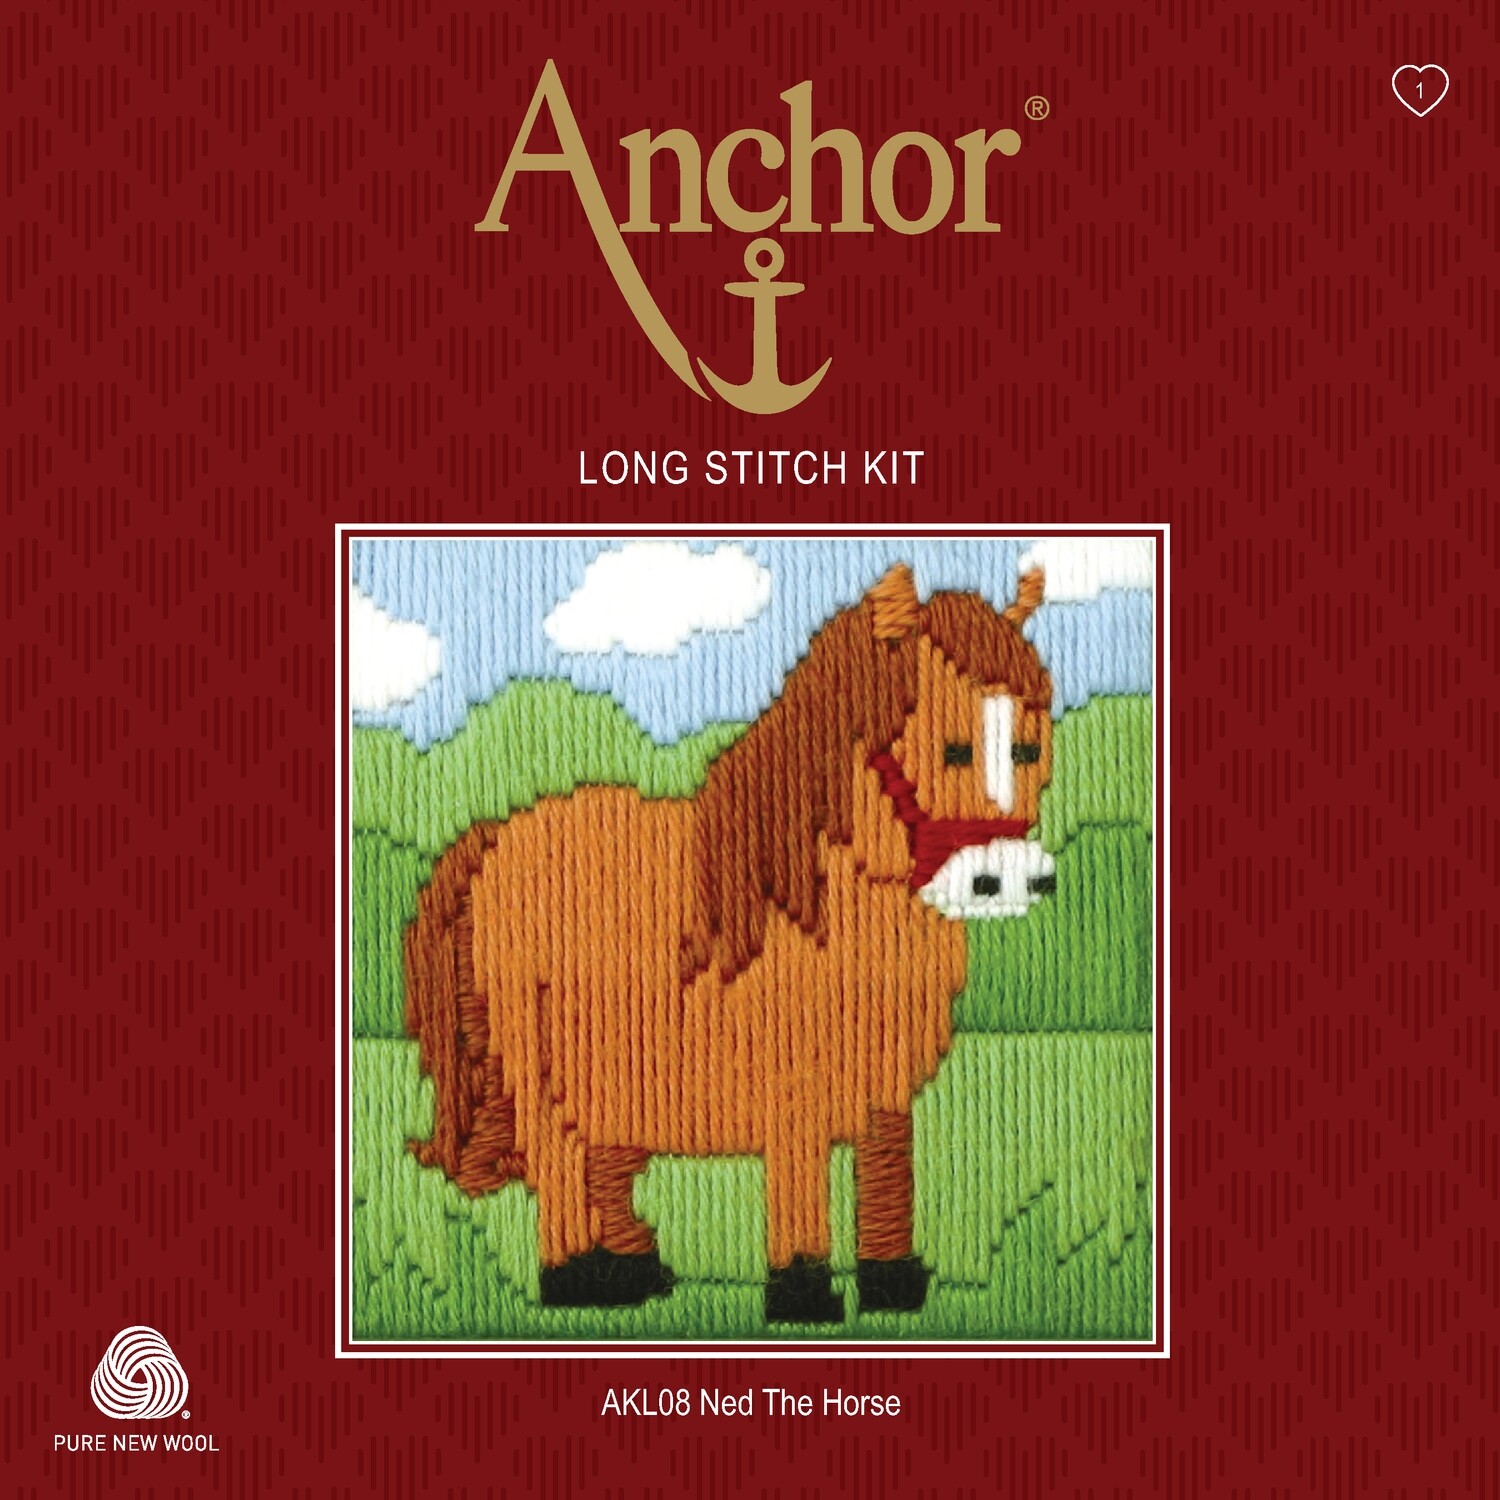 Anchor Starter Long Stitch Kit - Ned The Horse